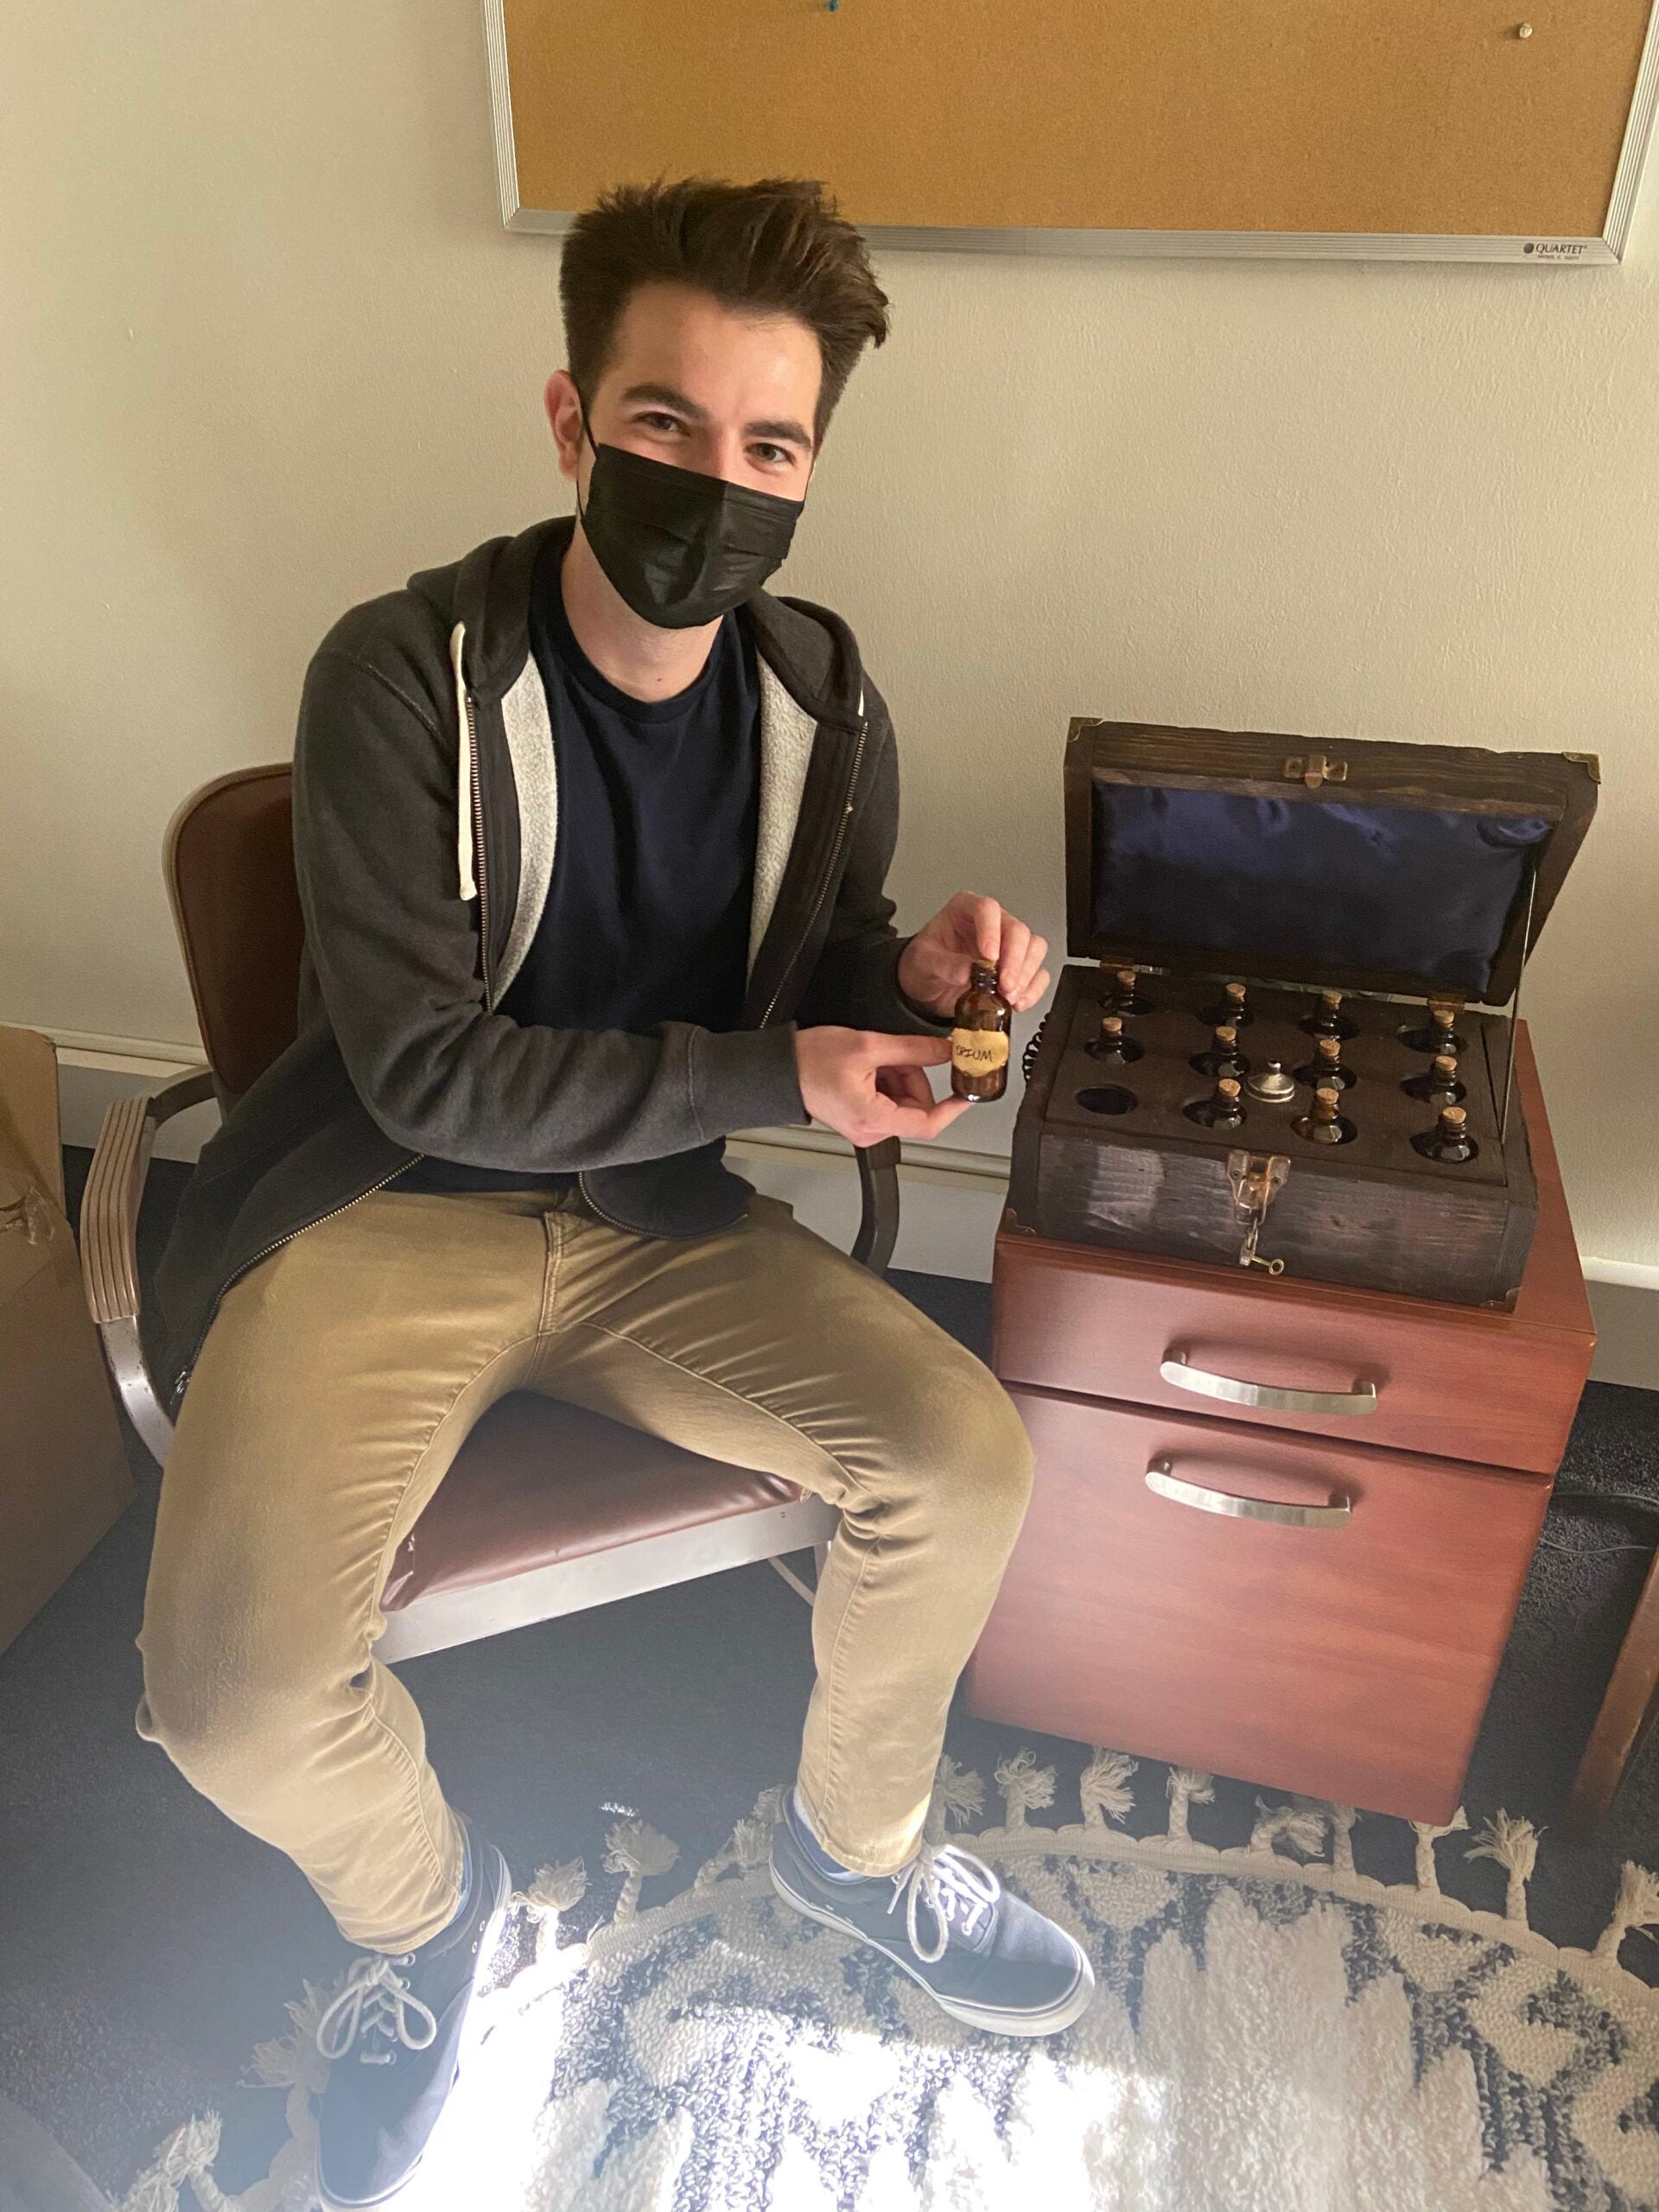 Evan Navori sitting next to the 1820s apothecary crate he recreated, which is open. Evan is holding a small bottle, inside the crate there are 11 more bottles. The crate is on top of a drawer.